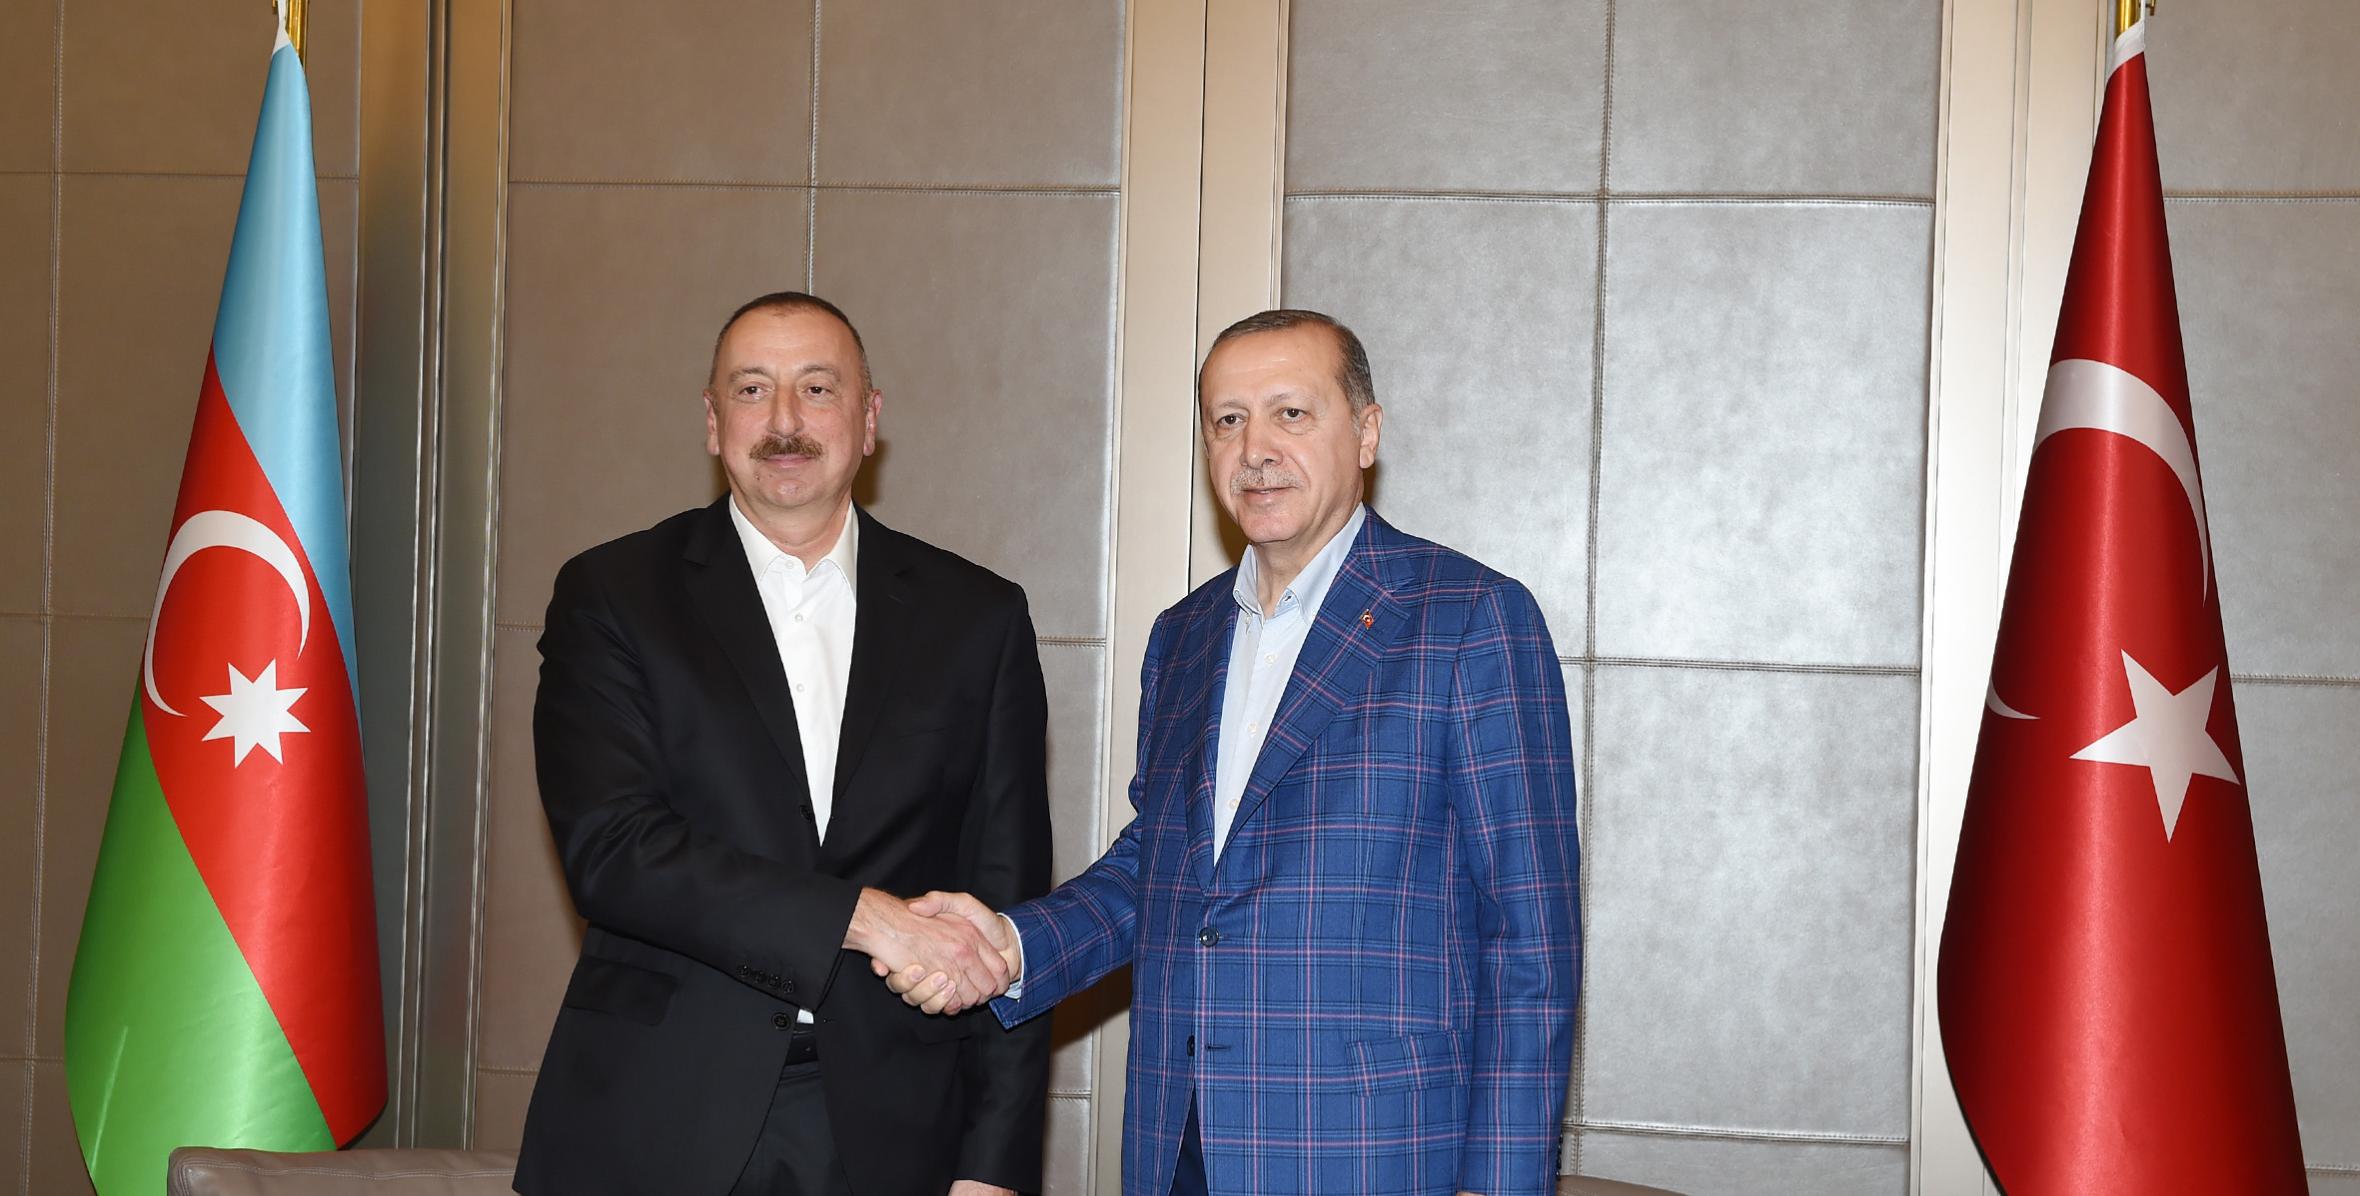 Ilham Aliyev, President Recep Tayyip Erdogan held a meeting and dined together